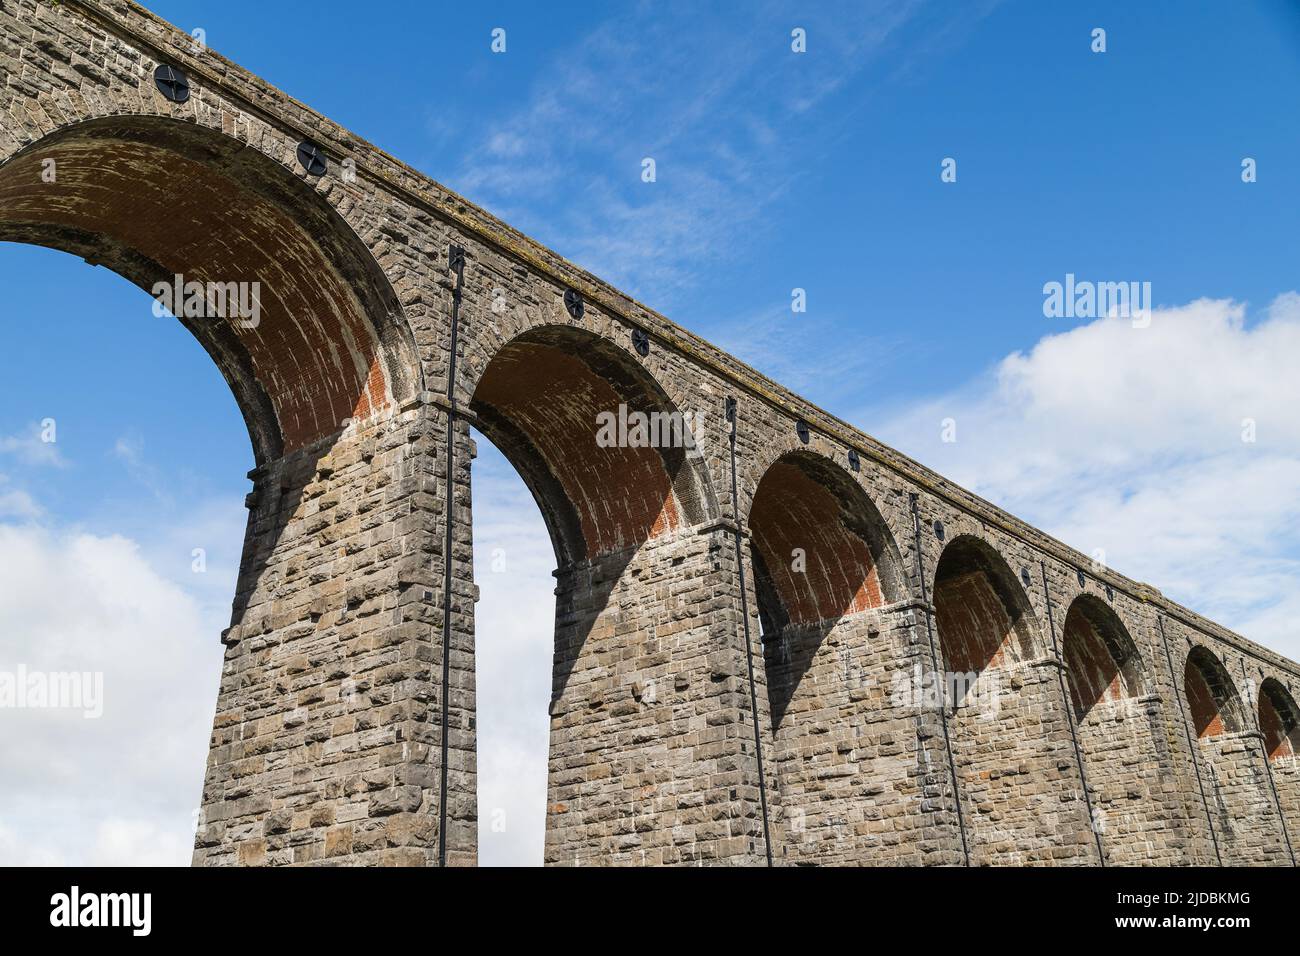 Looking up at the Ribblehead Viaduct under a bright sky pictured in the Yorkshire Dales in June 2022. Stock Photo